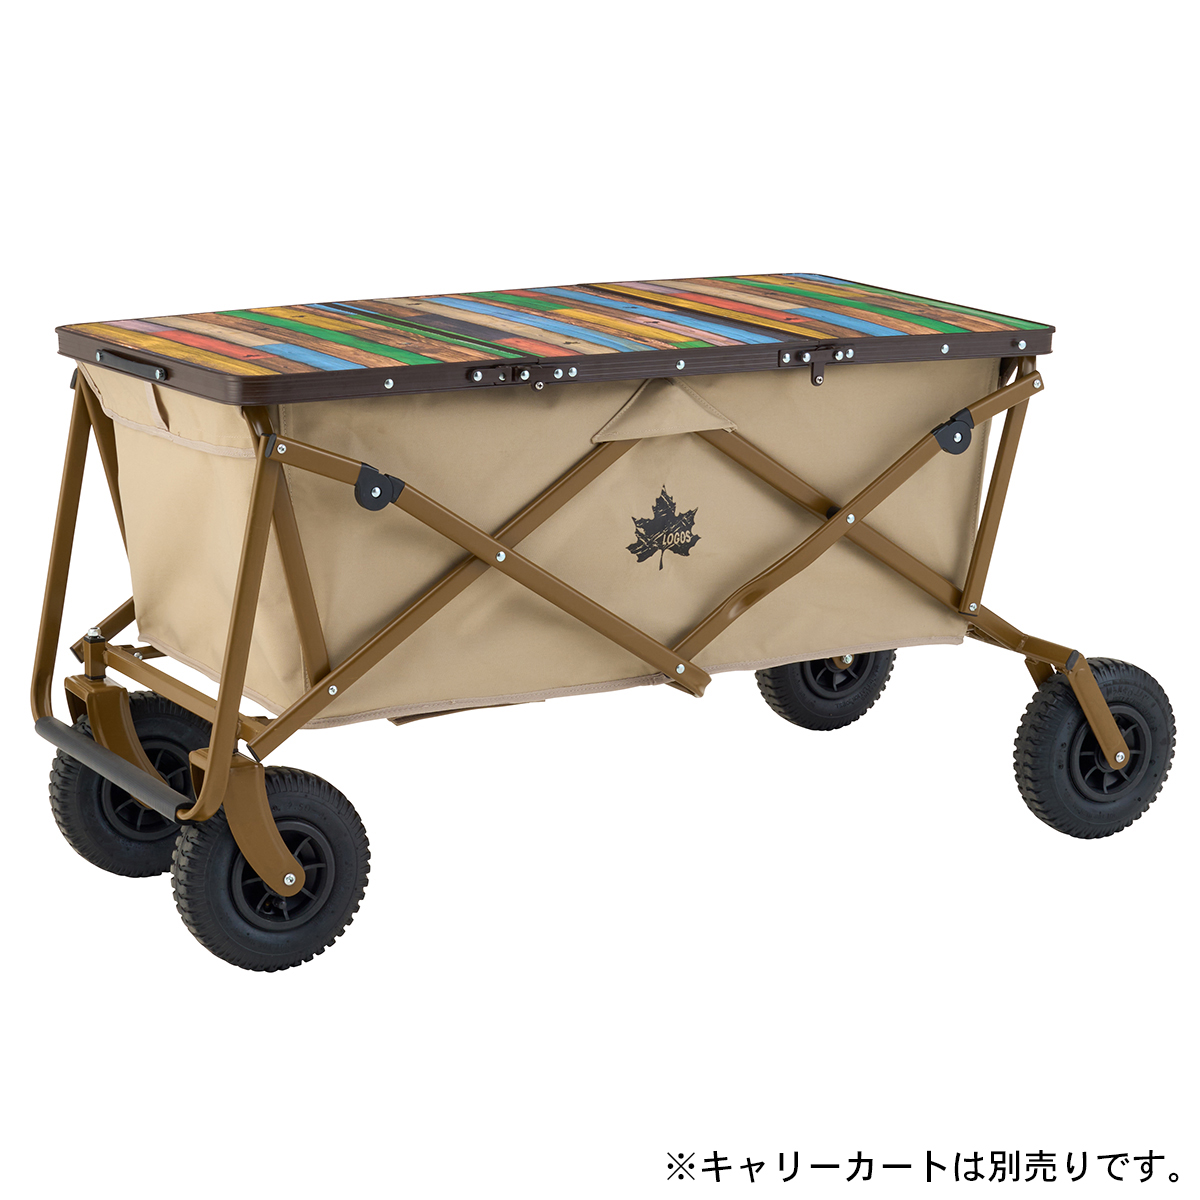 Old Wooden 丸洗いカートテーブルセット2|ギア|家具|セット|製品情報 